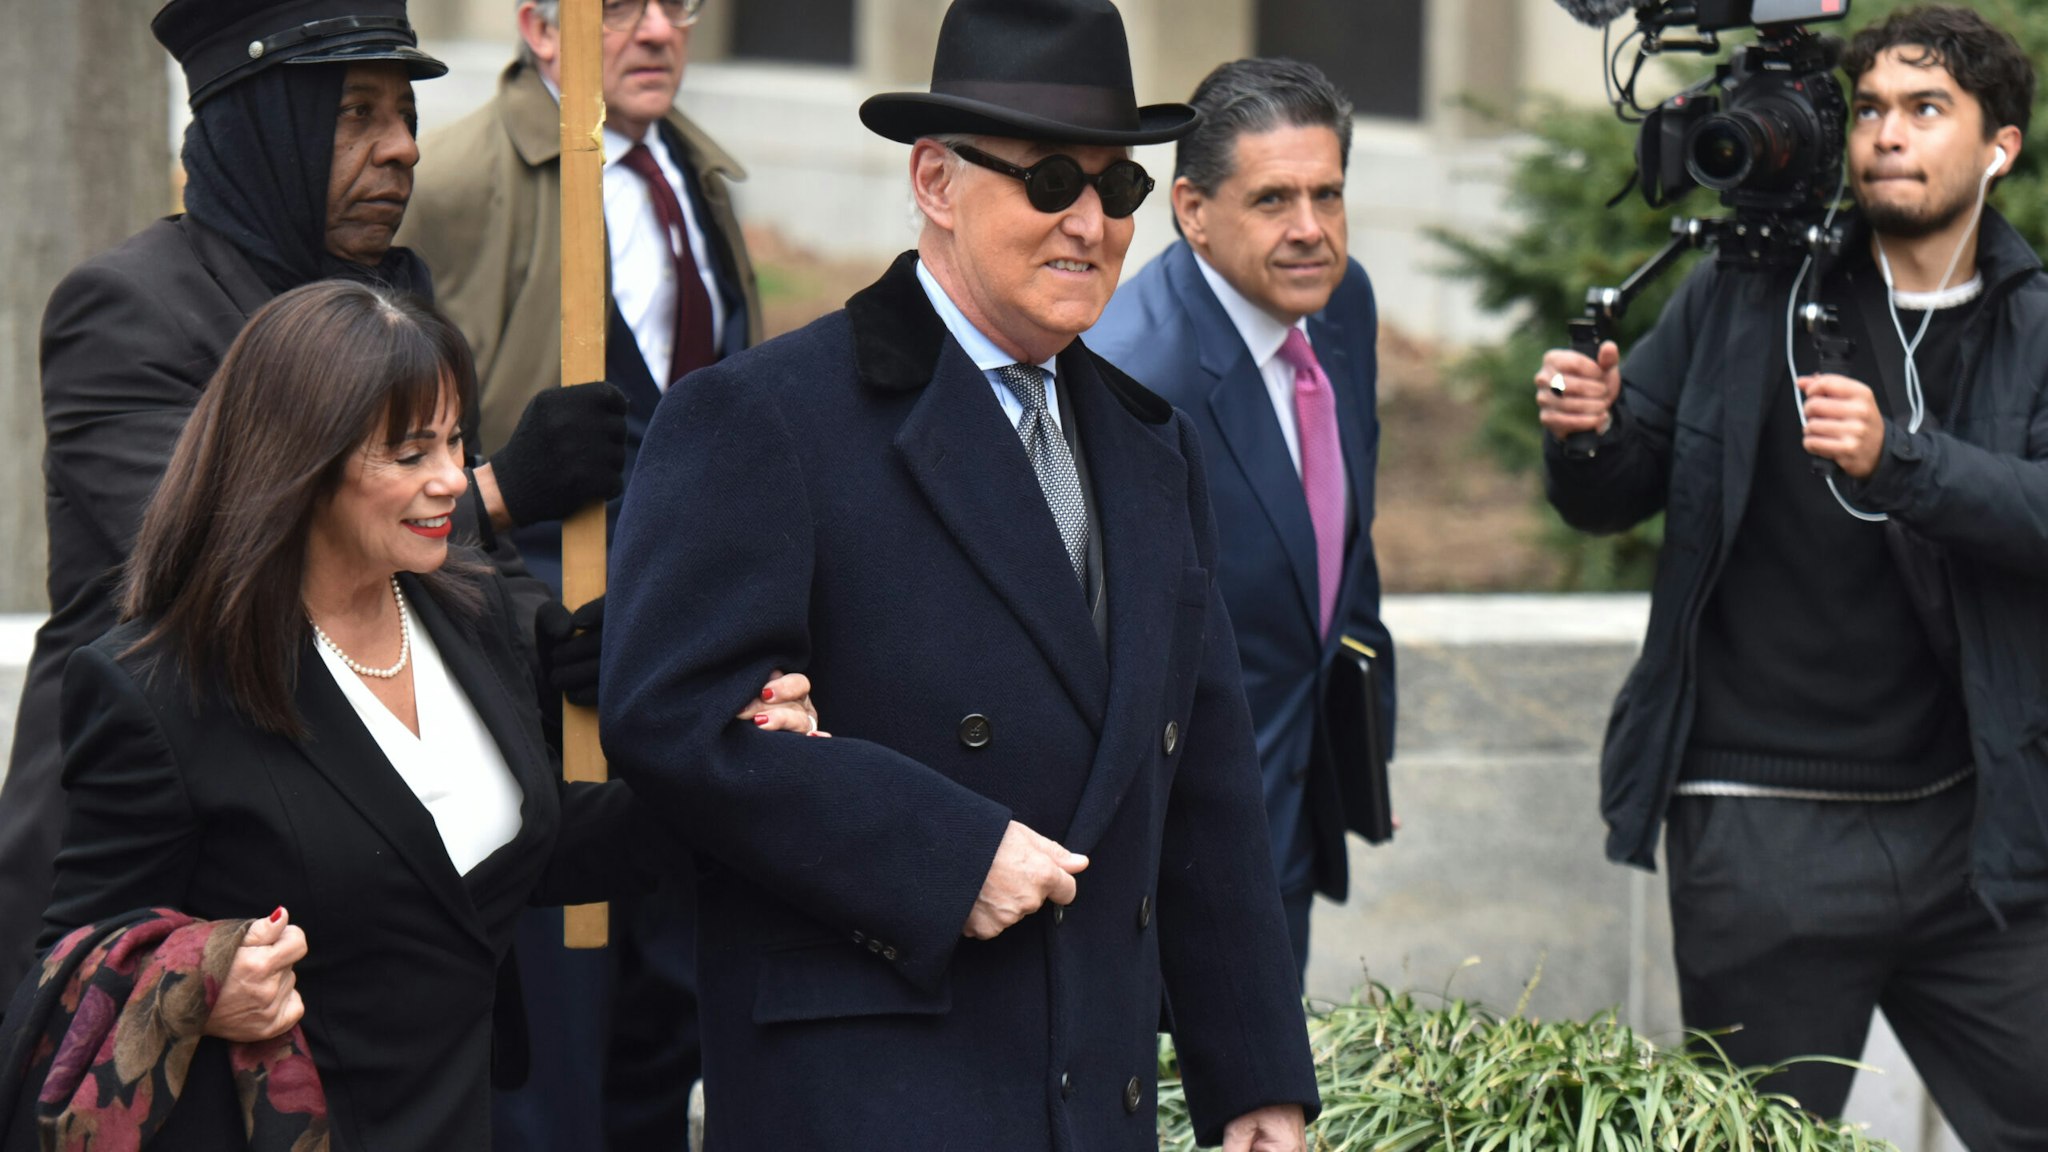 WASHINGTON , DC FEBRUARY 20: Roger Stone arrives for his sentencing at the E. Barrett Prettyman Courthouse in Washington, DC on February, 20, 2020. Roger Stone, President Trumps longtime friend and political confidant faces prison for witness tampering and lying to Congress (Photo by Marvin Joseph/The Washington Post via Getty Images)